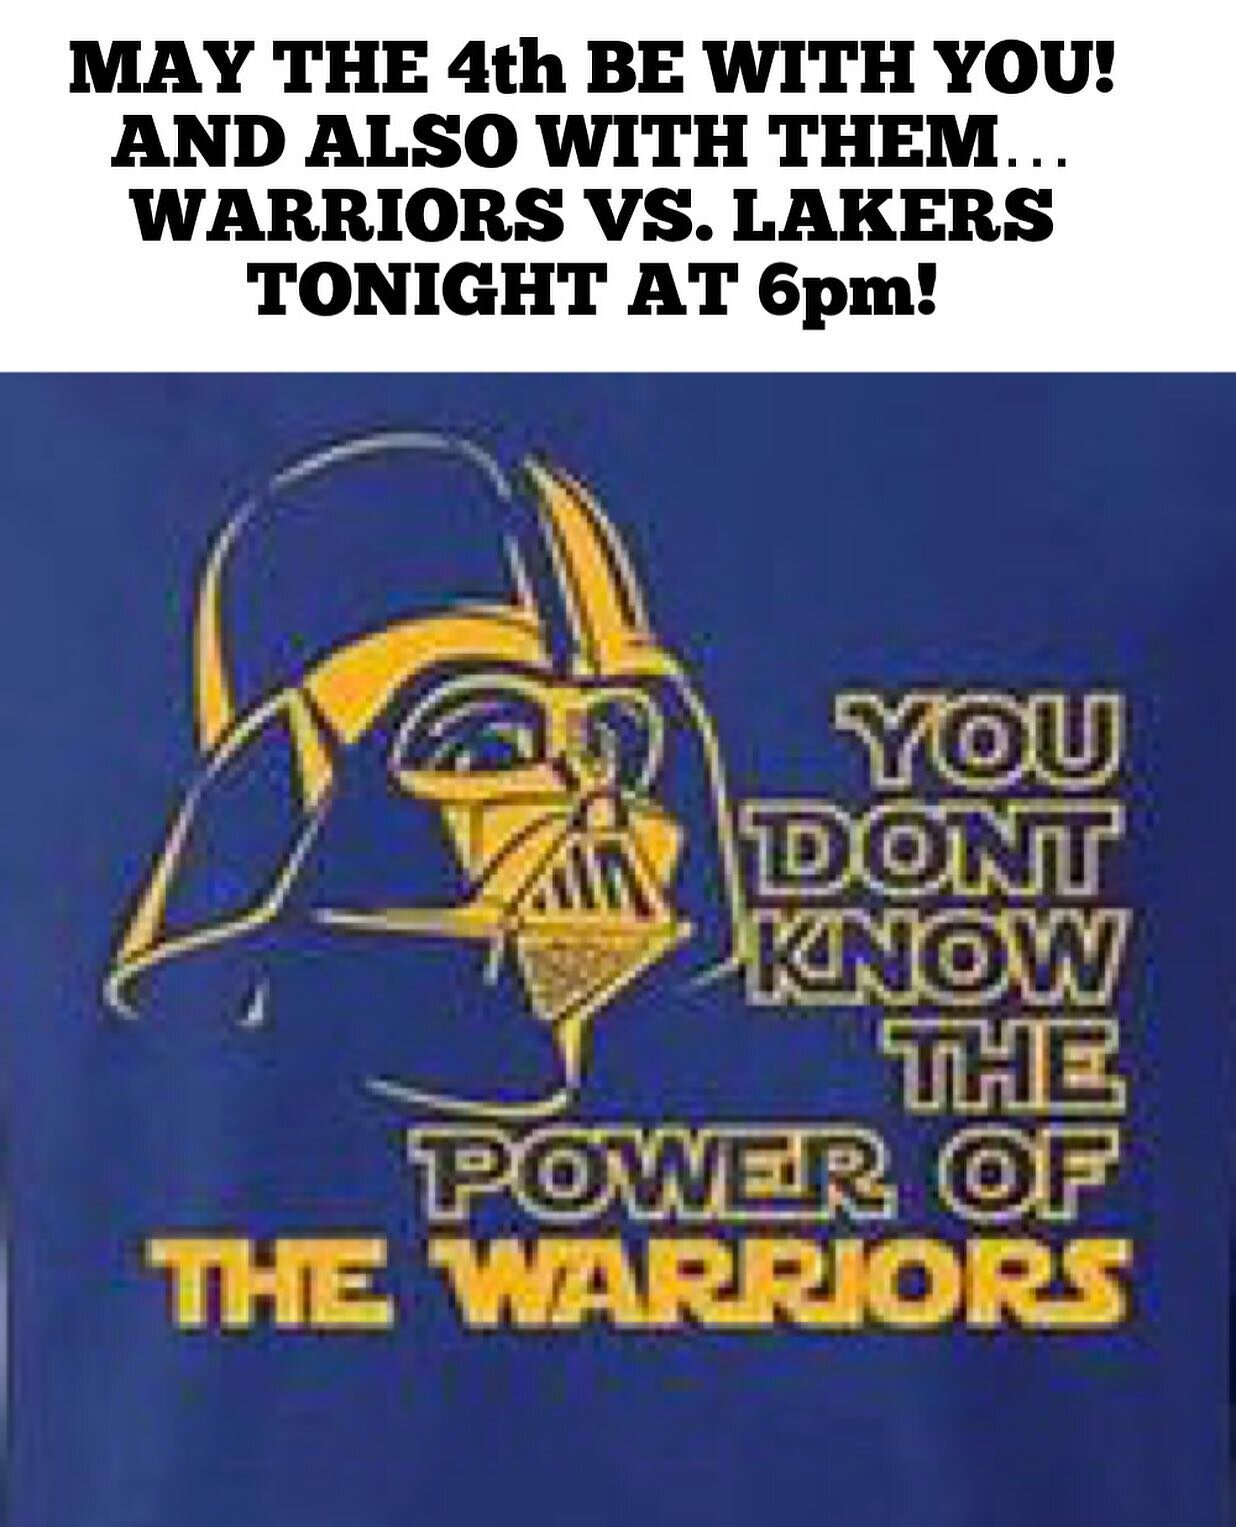 Do or do not, there is no try.  So get on down to the SFAC to watch game 2!  Come early to get a seat, game starts at 6pm!  @thesfac #maythe4thbewithyou #dubnation #warriorsvslakers #stephvsbron #nbaplayoffs #bestsportsbarinsf